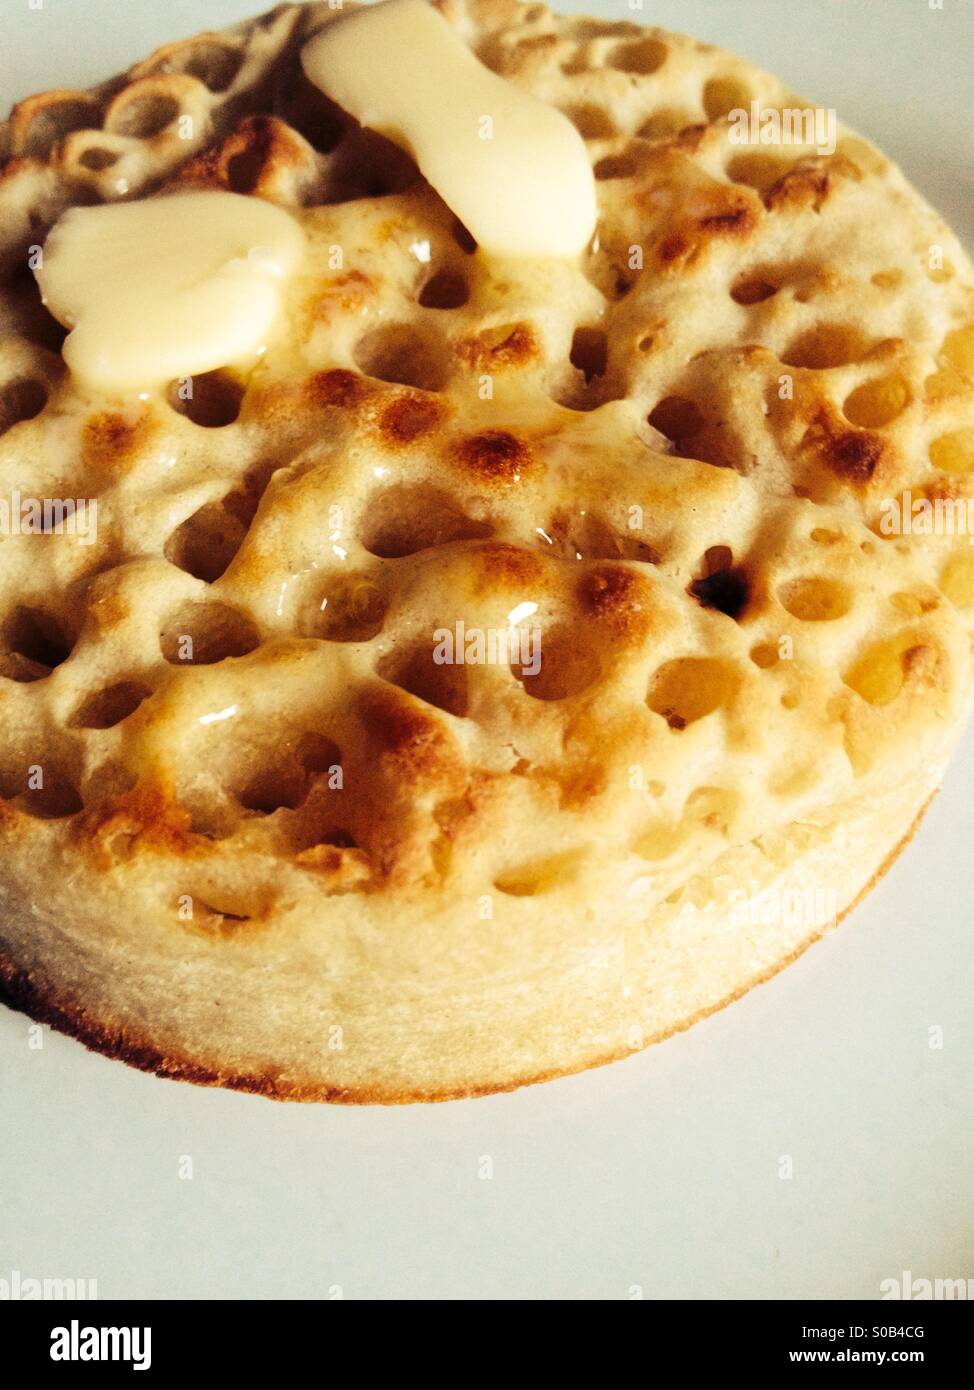 Hot buttered crumpet on a white plate Stock Photo